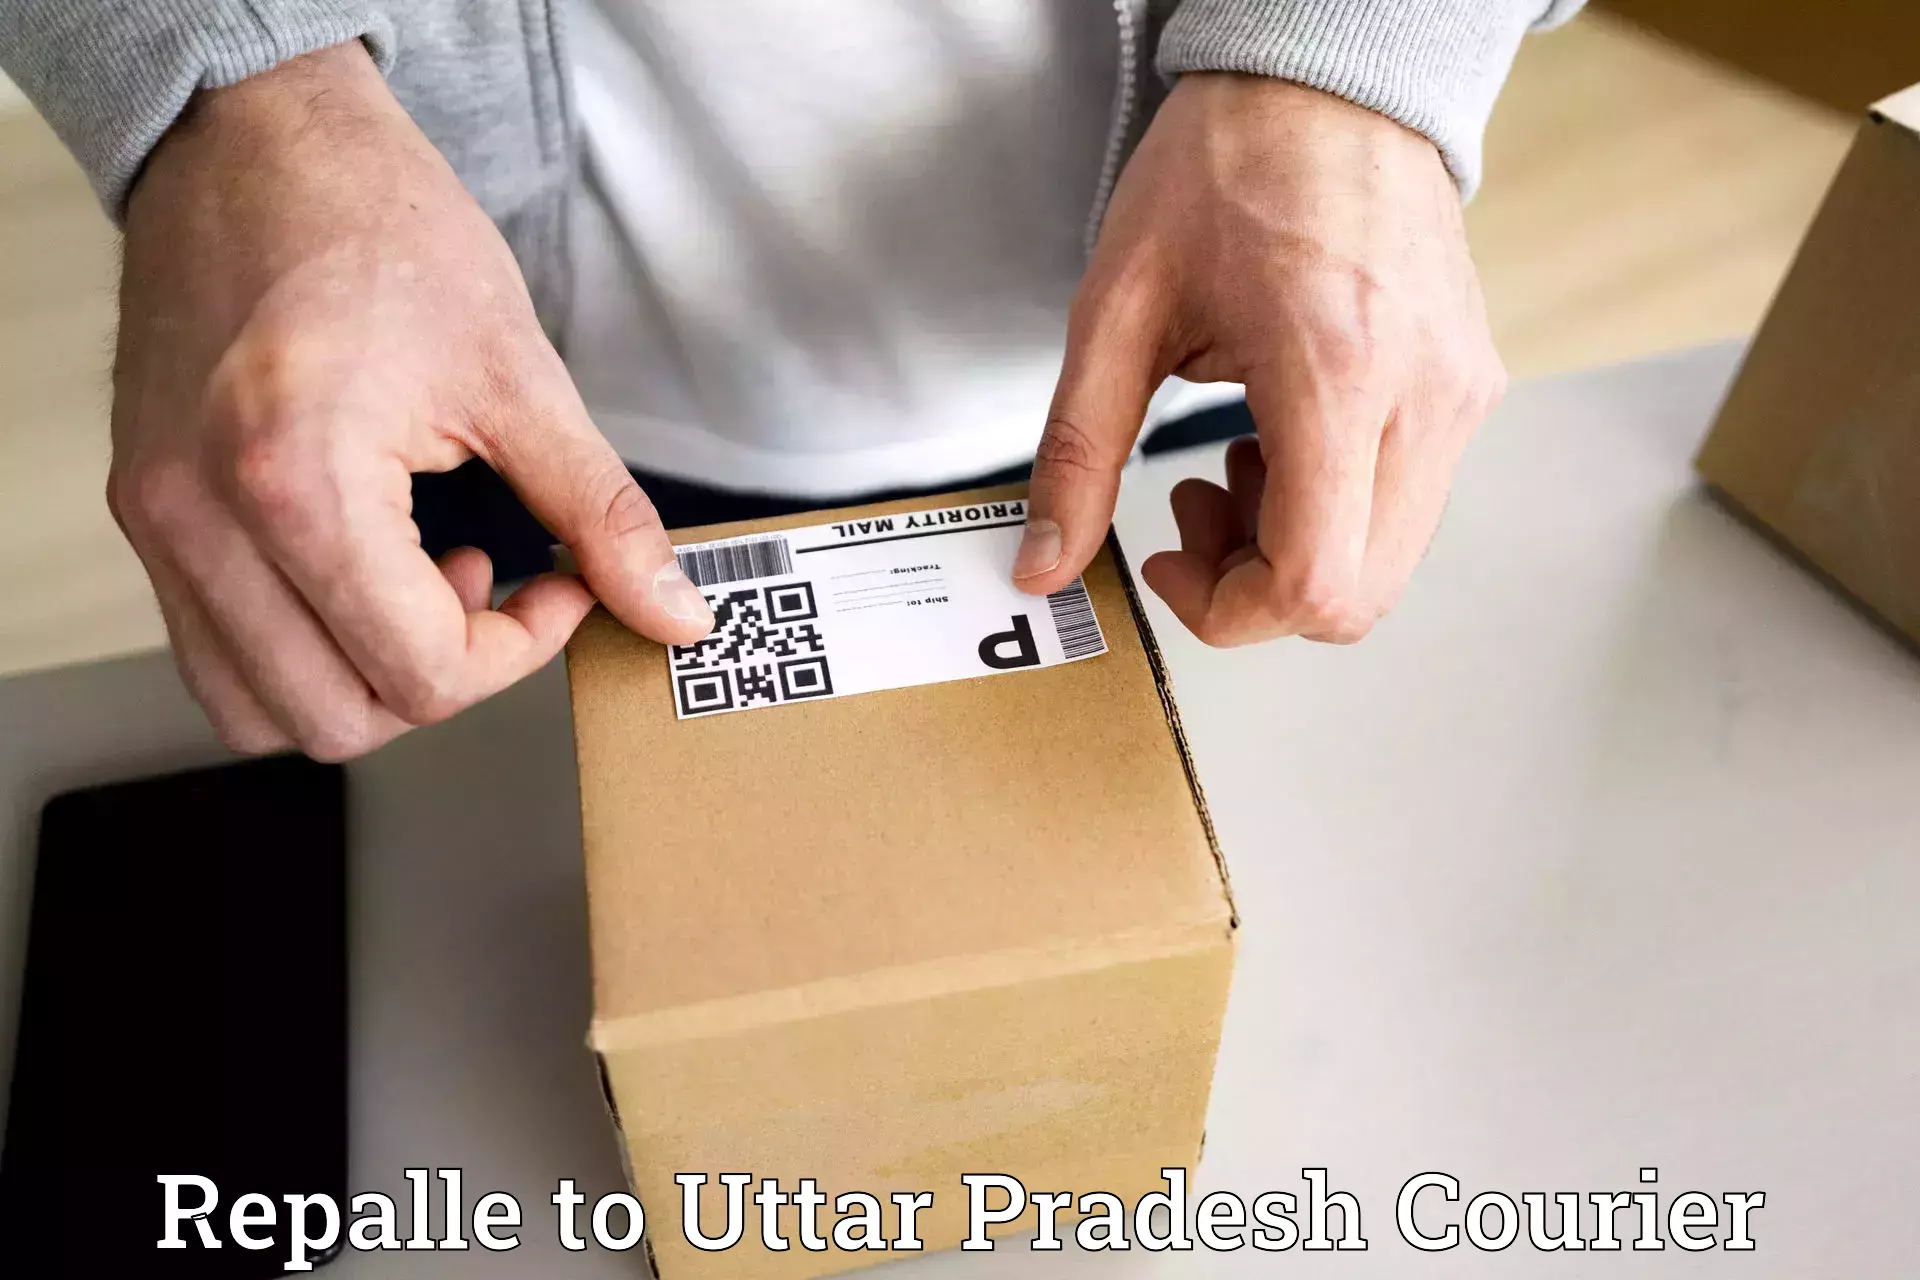 Advanced package delivery Repalle to Uttar Pradesh